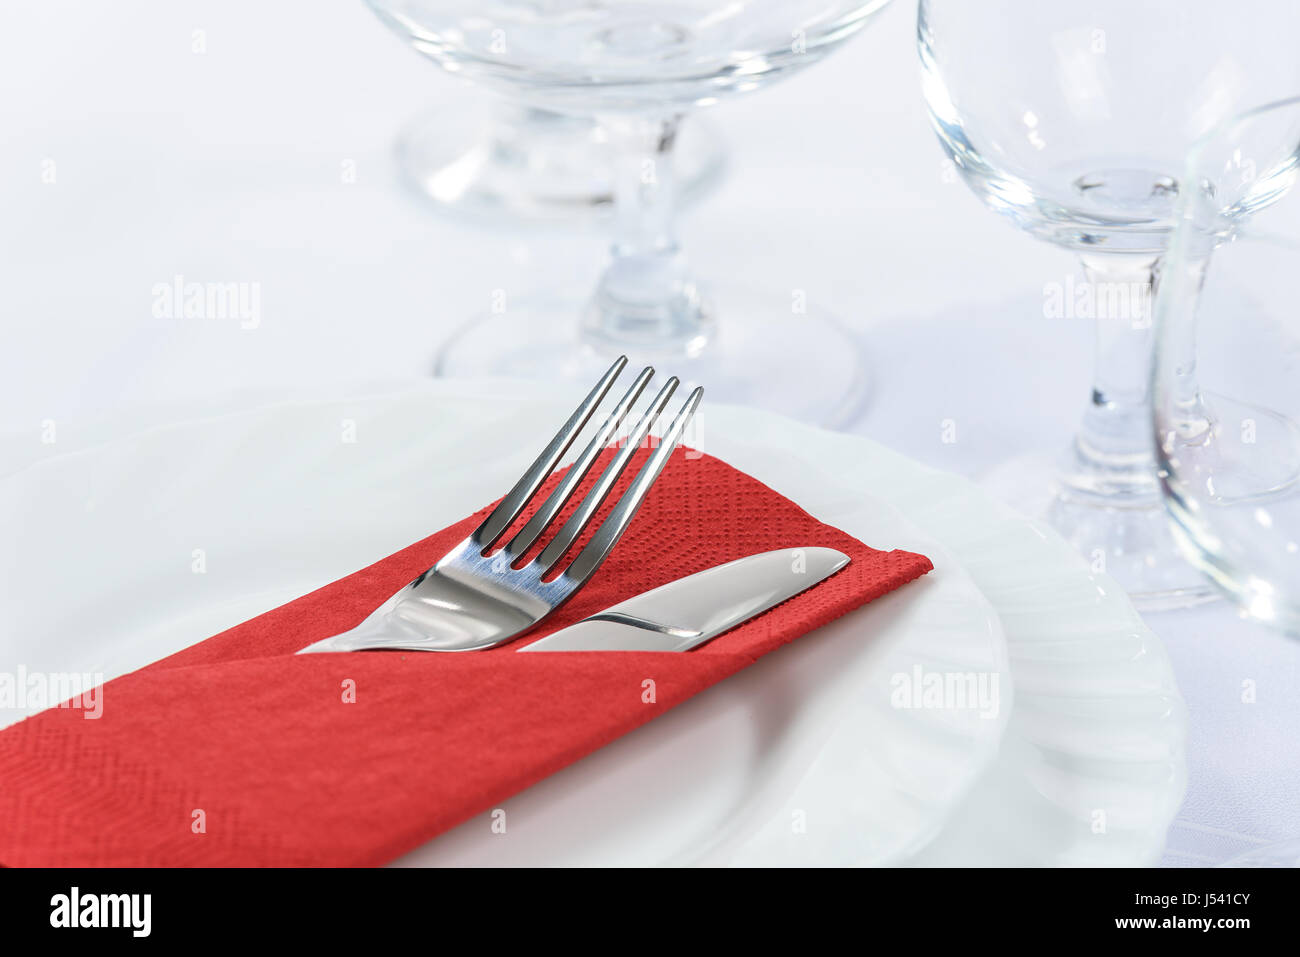 Elegant table setting in the restaurant: cutlery in a red napkin on the plates and next to the wine glasses Stock Photo